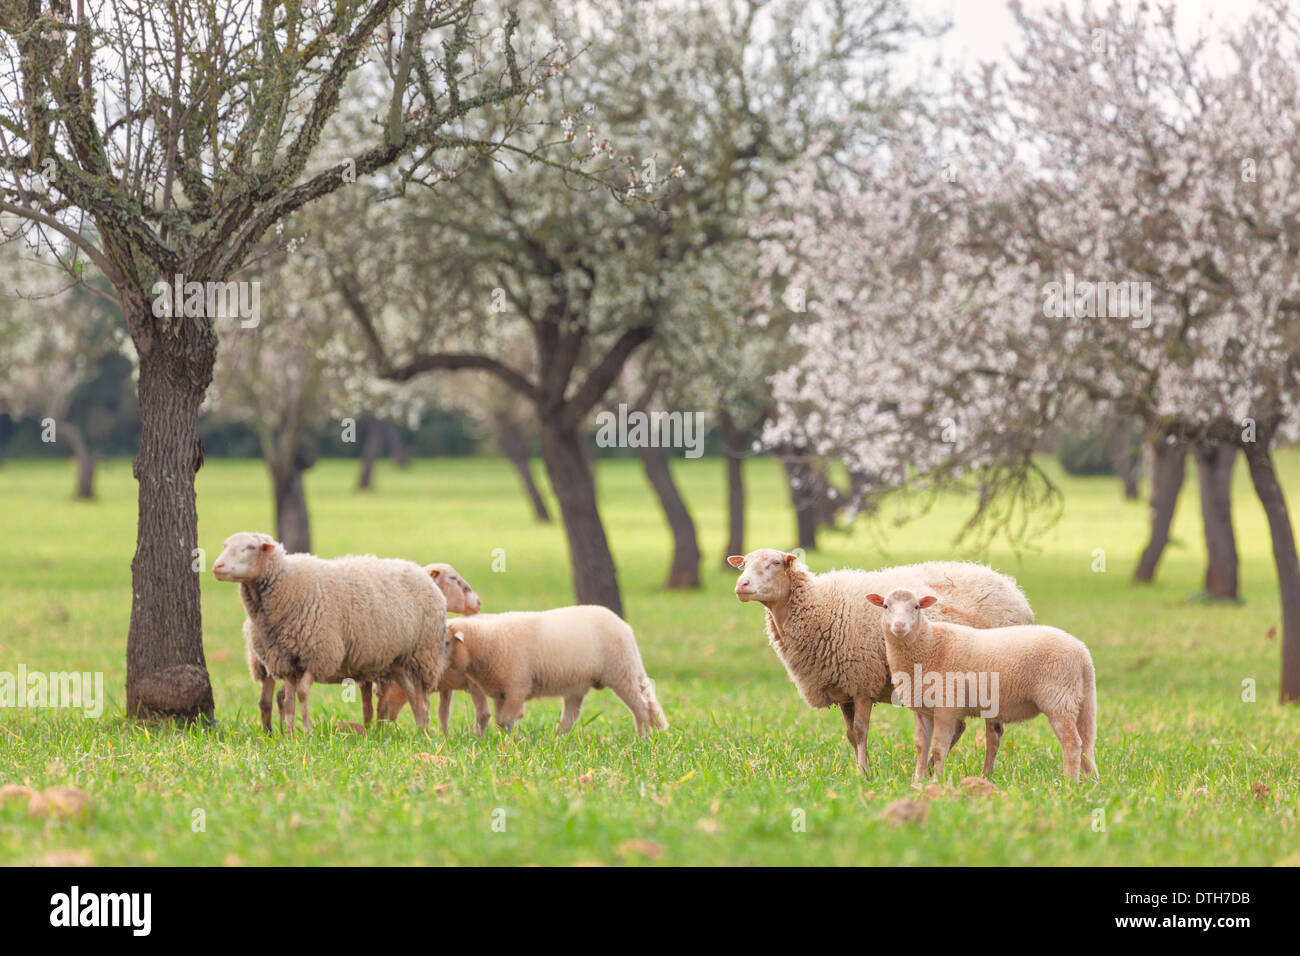 Almond trees in blossom in February. Sheep pasturing in the countryside. Llucmajor area. Majorca, Balearic islands, Spain Stock Photo